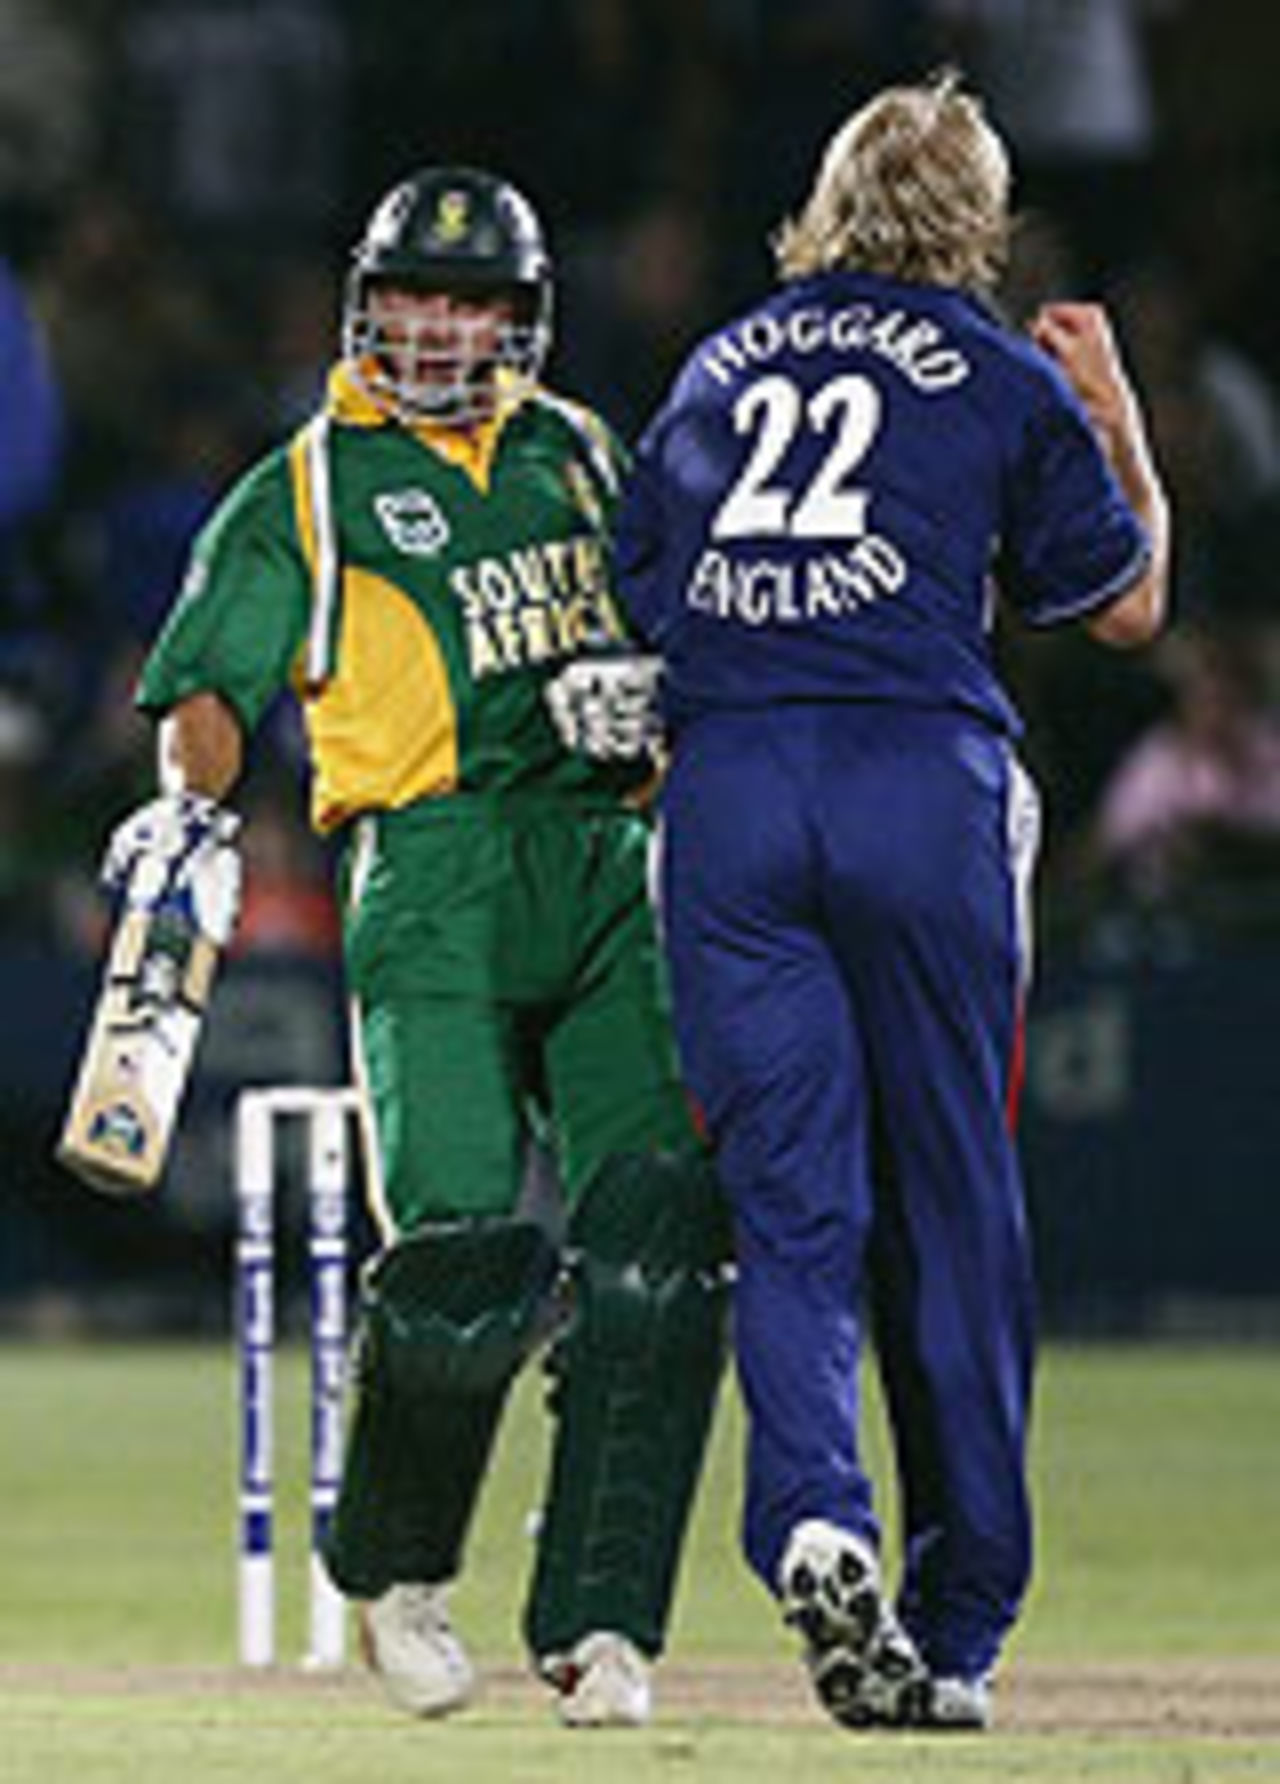 Collision course: Herschelle Gibbs bumps into Matthew Hoggard, as South Africa move into a promising position at Port Elizabeth, South Africa v England, Port Elizabeth, February 4, 2005